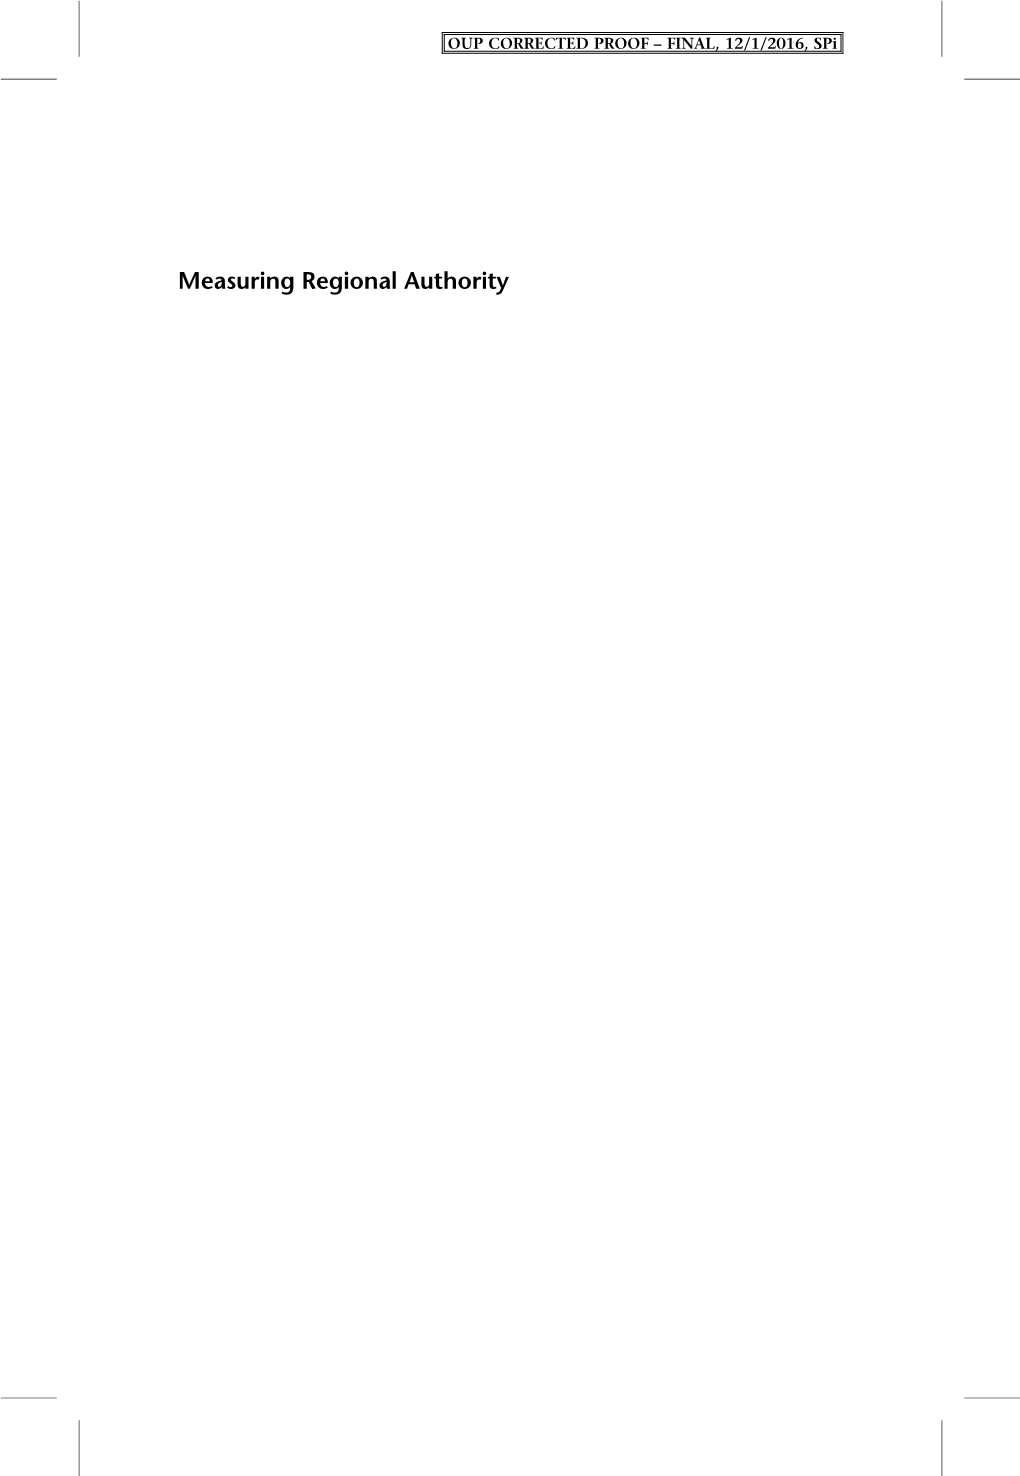 Measuring Regional Authority OUP CORRECTED PROOF – FINAL, 12/1/2016, Spi